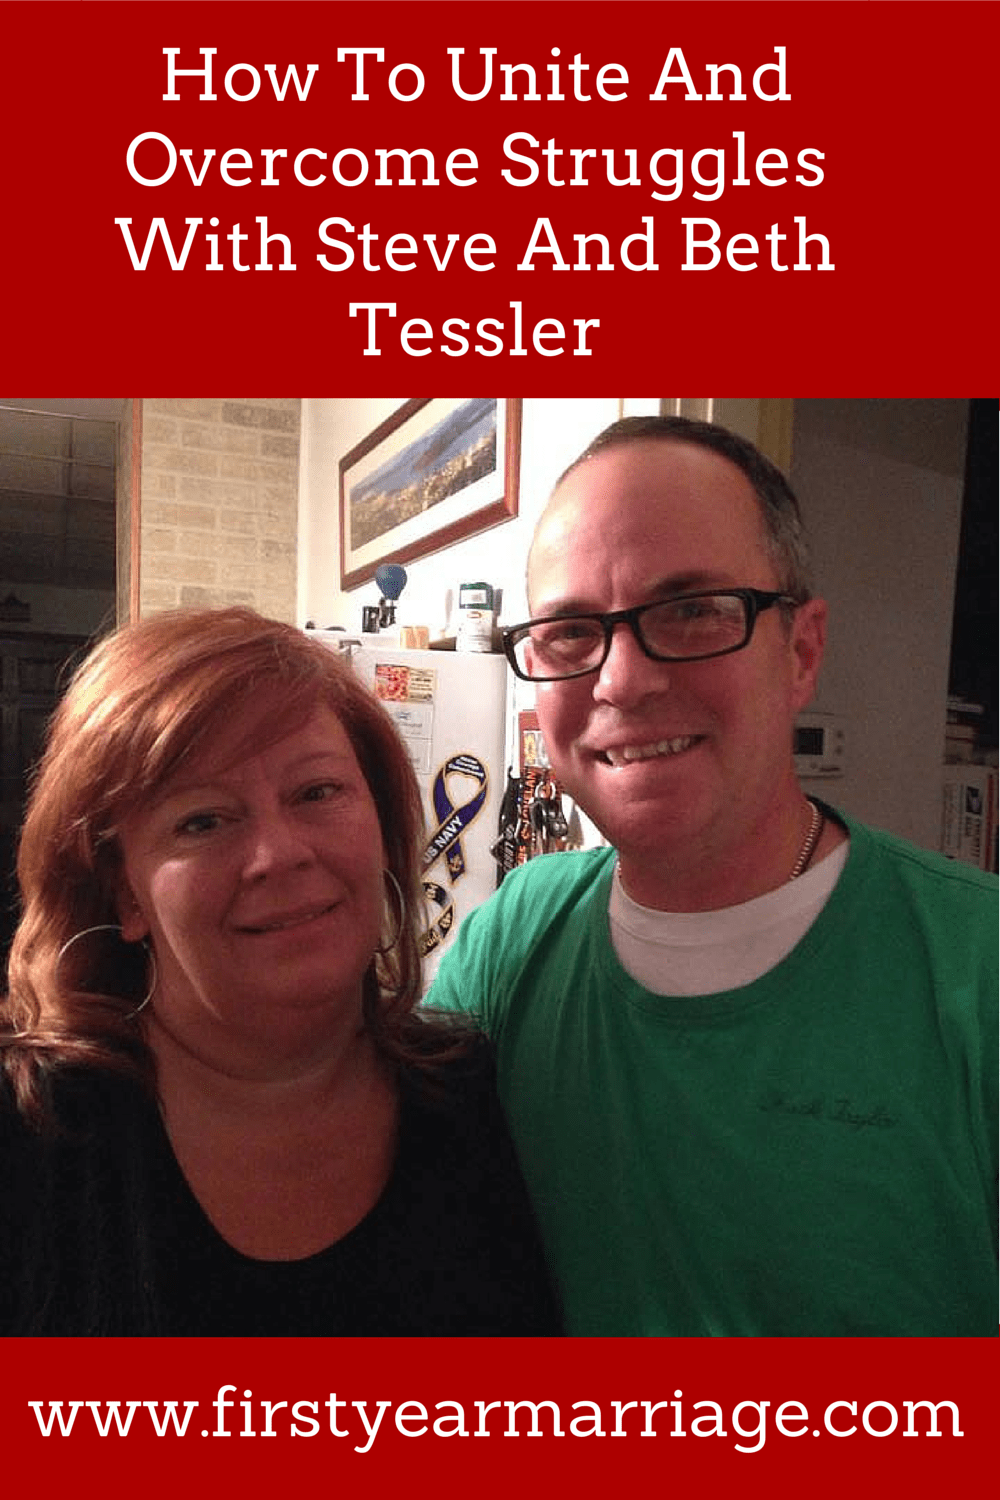 How To Unite and Overcome Struggles With Steve and Beth Tessler